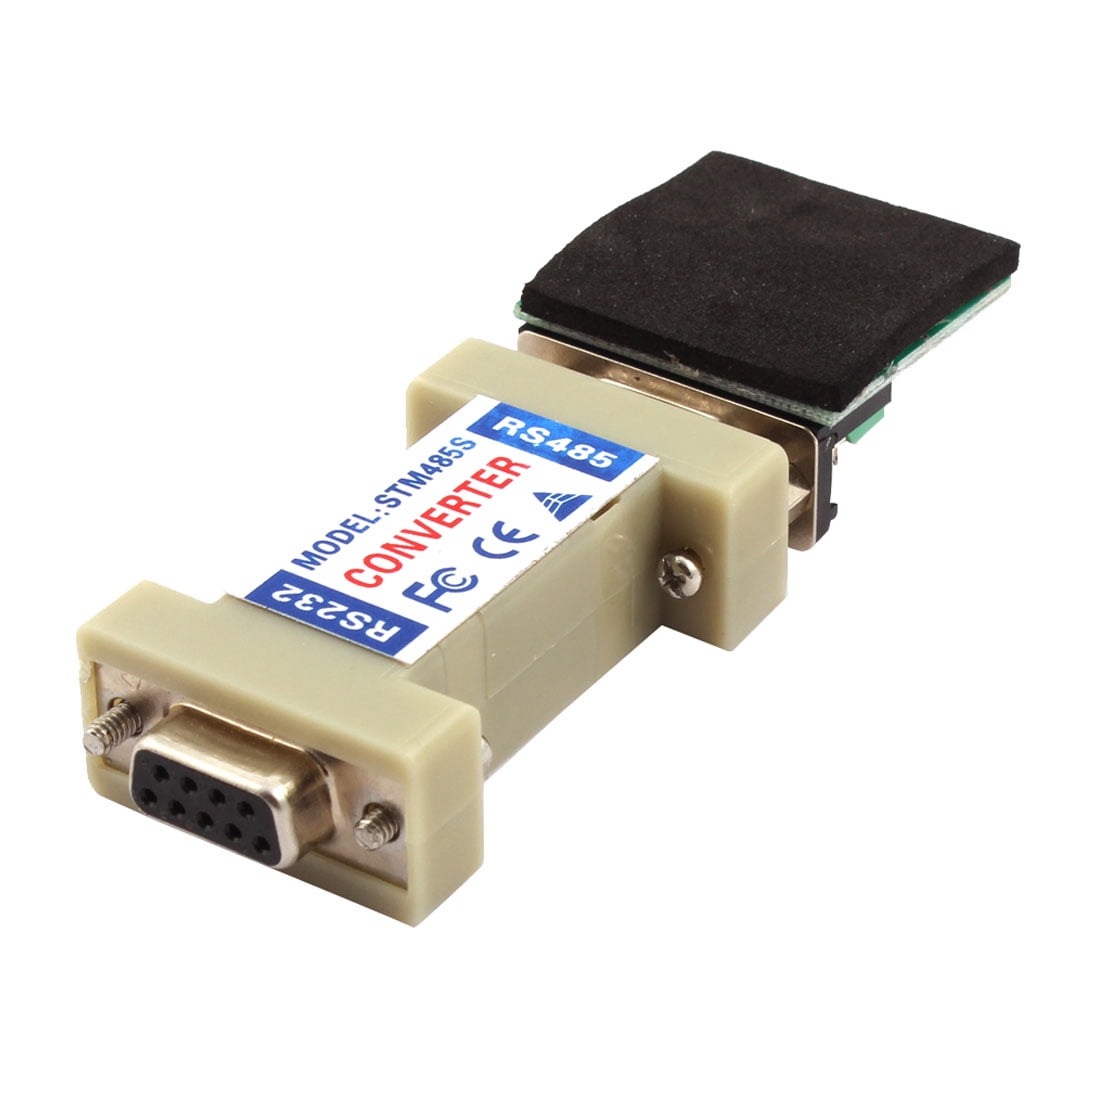 RS232 to RS485 Communication Data Interface Converter Adapter w ...